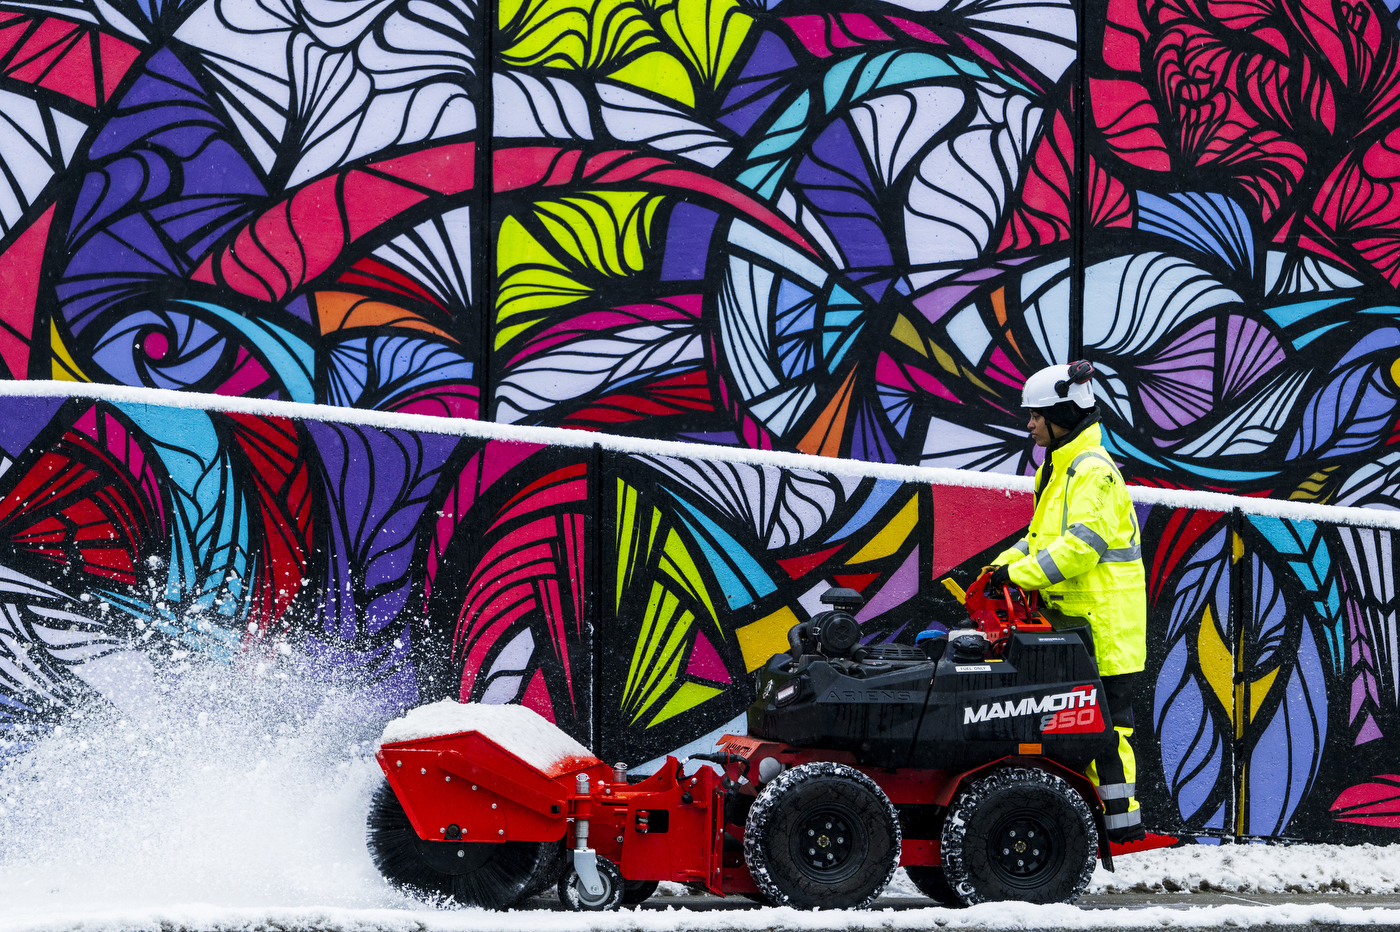 A person wearing a neon-yellow jacket uses a snowplow to clear a path in front of a multi-colored mural.